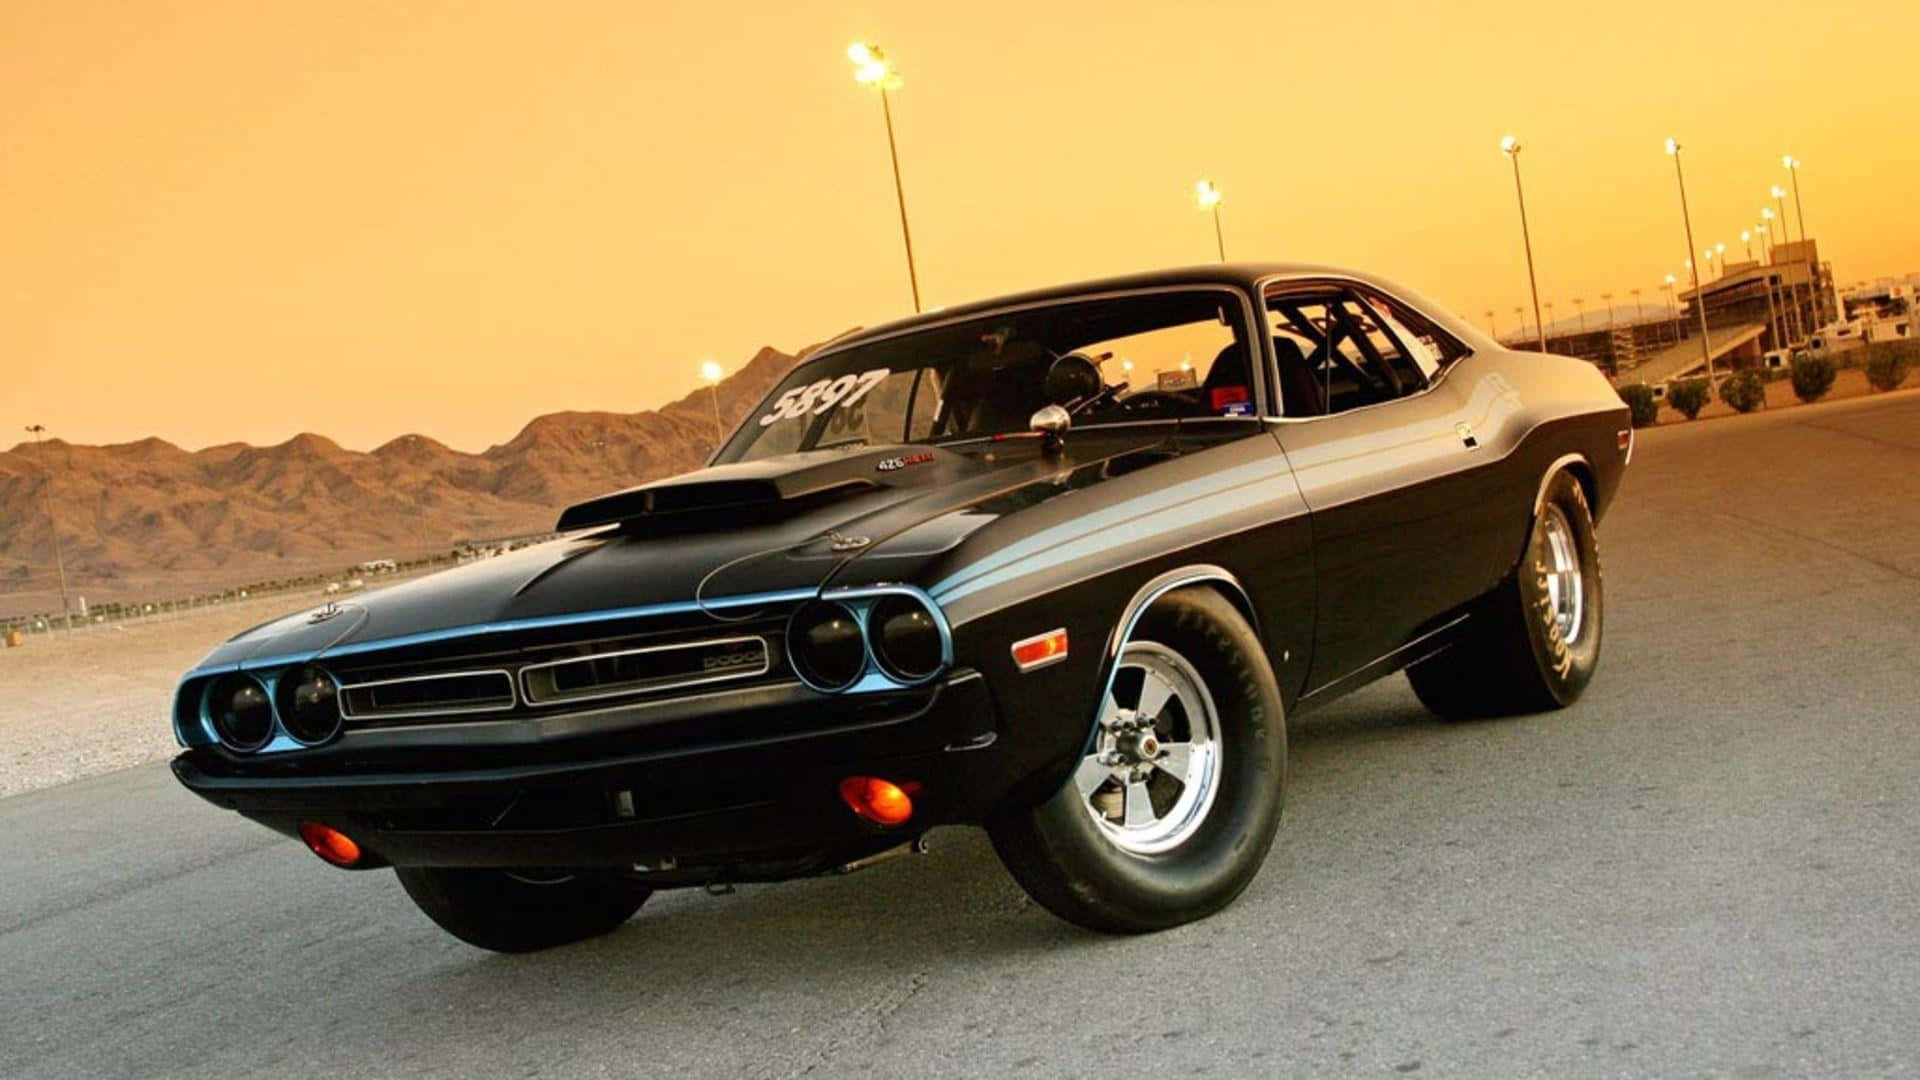 Fast And Furious 1 Dodge Challenger Travelling Wallpaper